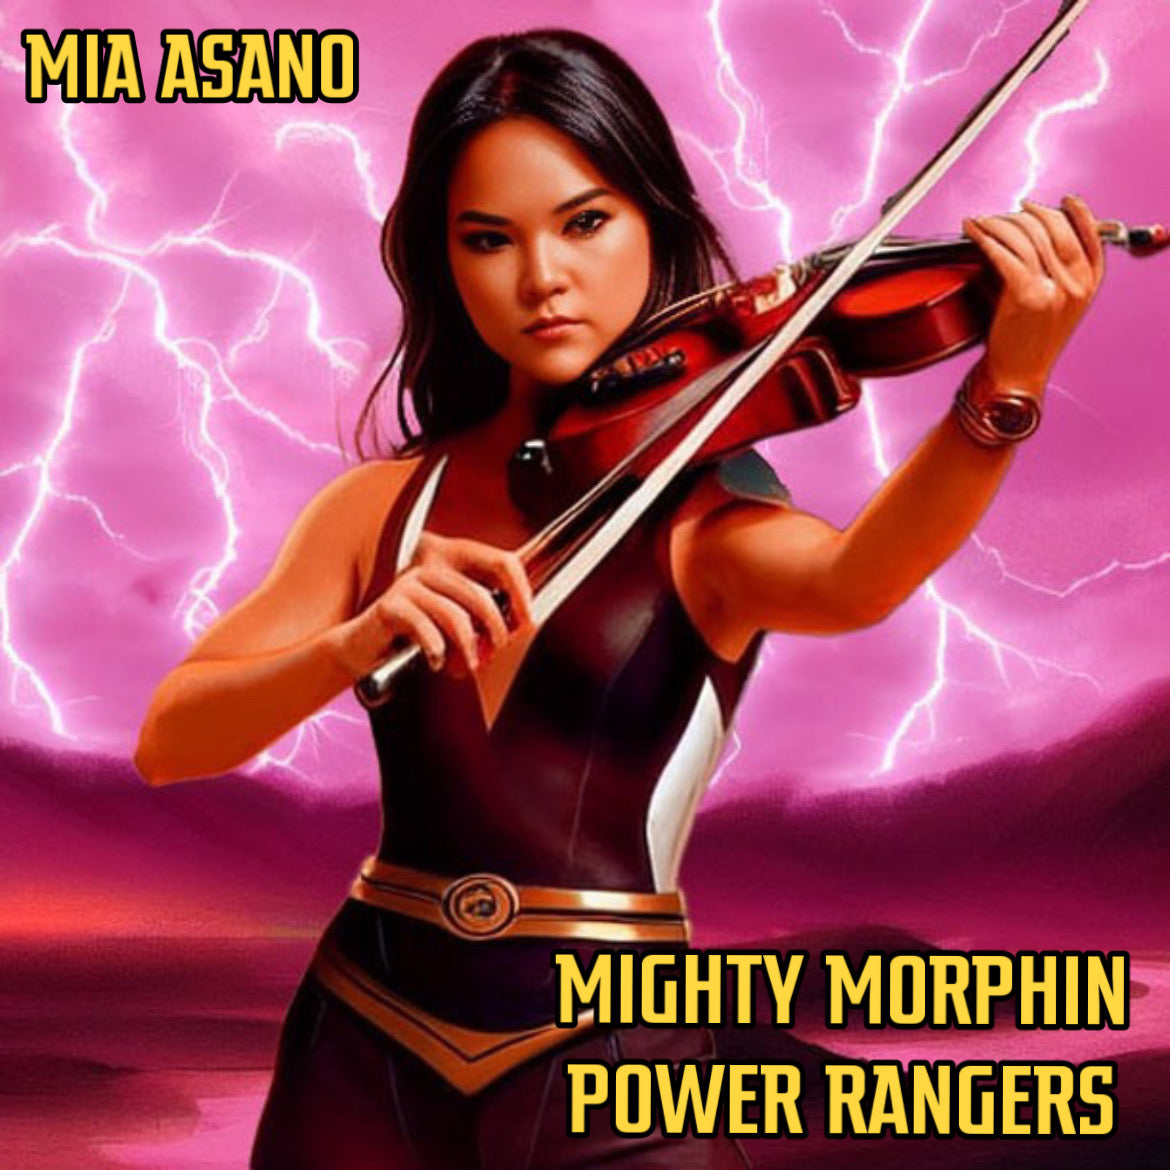 Cover art for Mia Asano's viral electric violin cover of the mighty morphin power rangers theme song dedicated to Jason David Frank